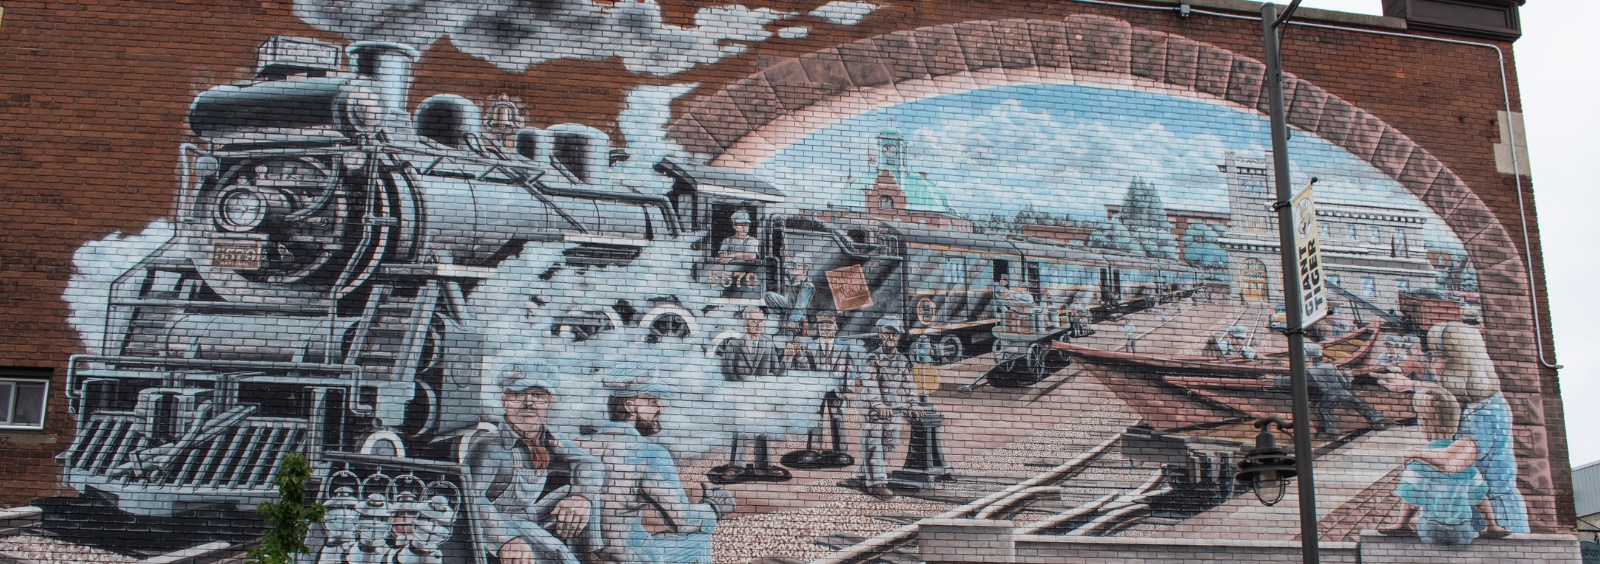 The Pembroke Heritage Murals mural "Grand Trunk Union Station" showing a train station with people working and watching trains.